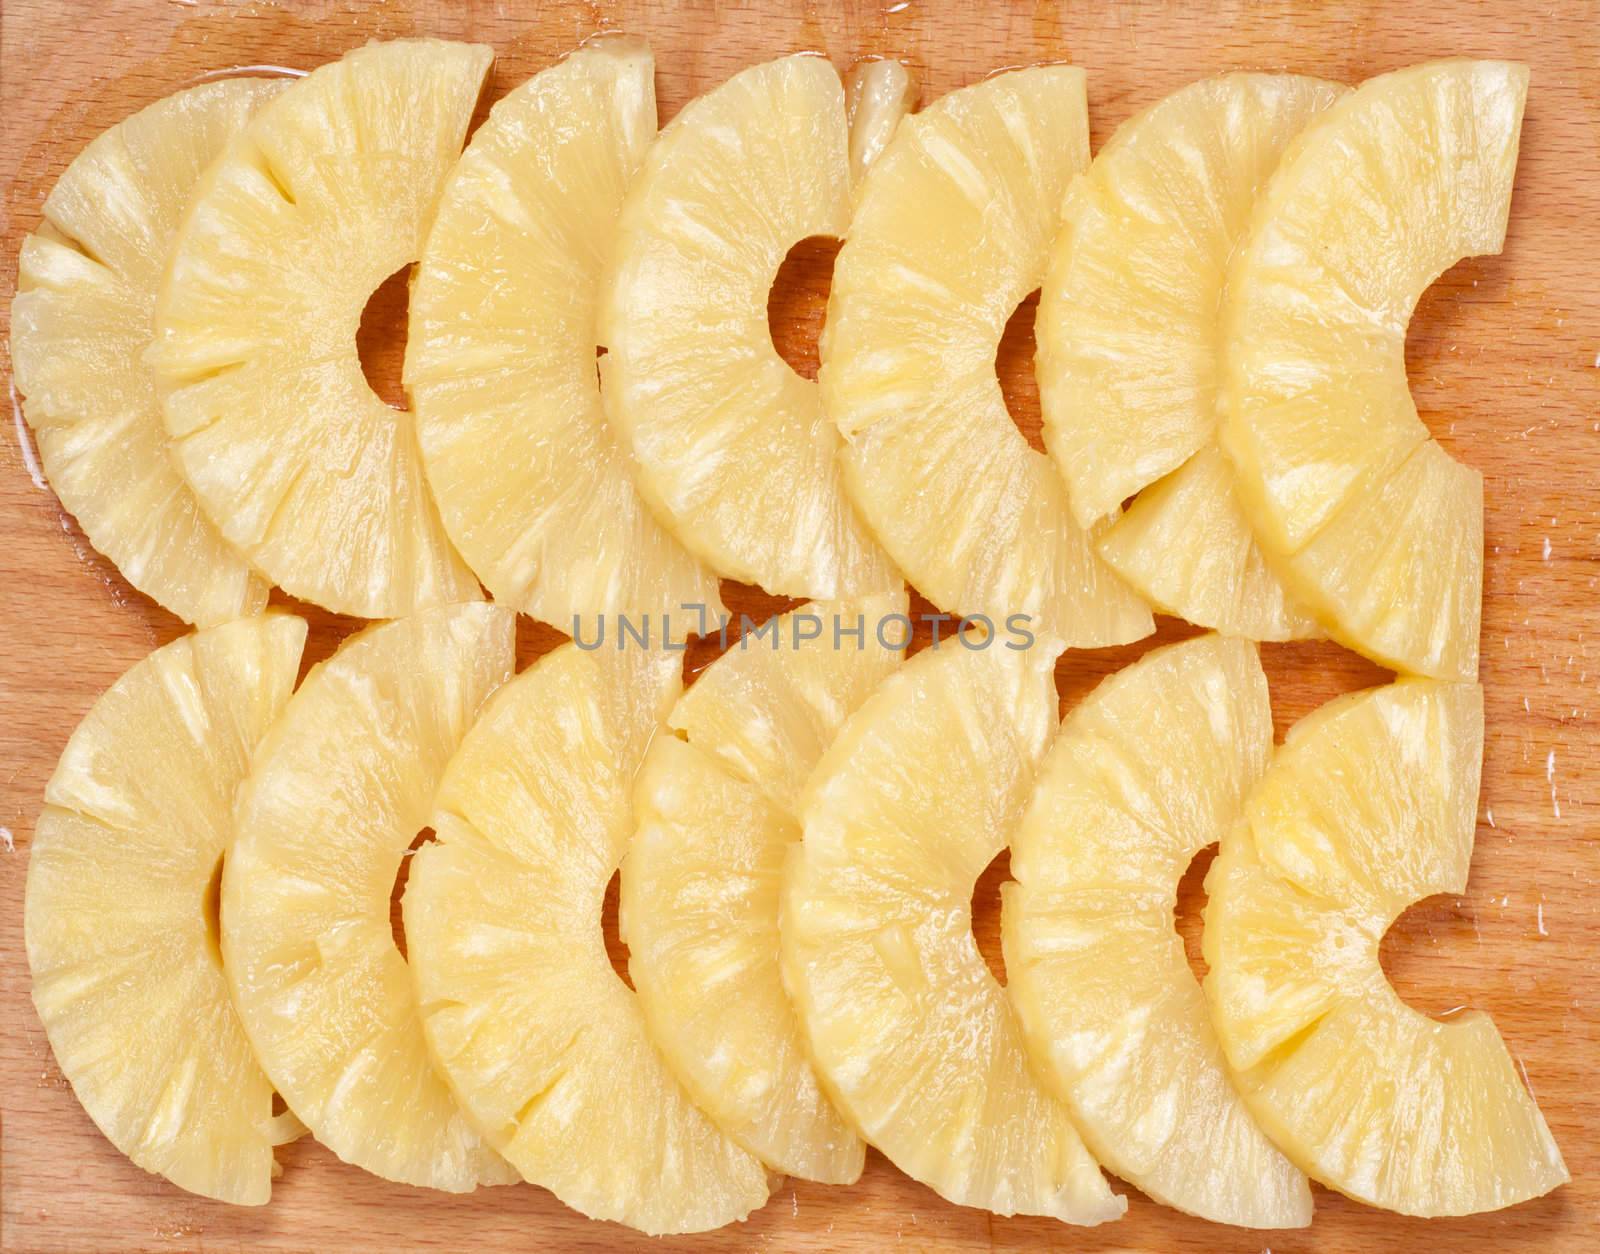 pineapple slices on wooden board close up